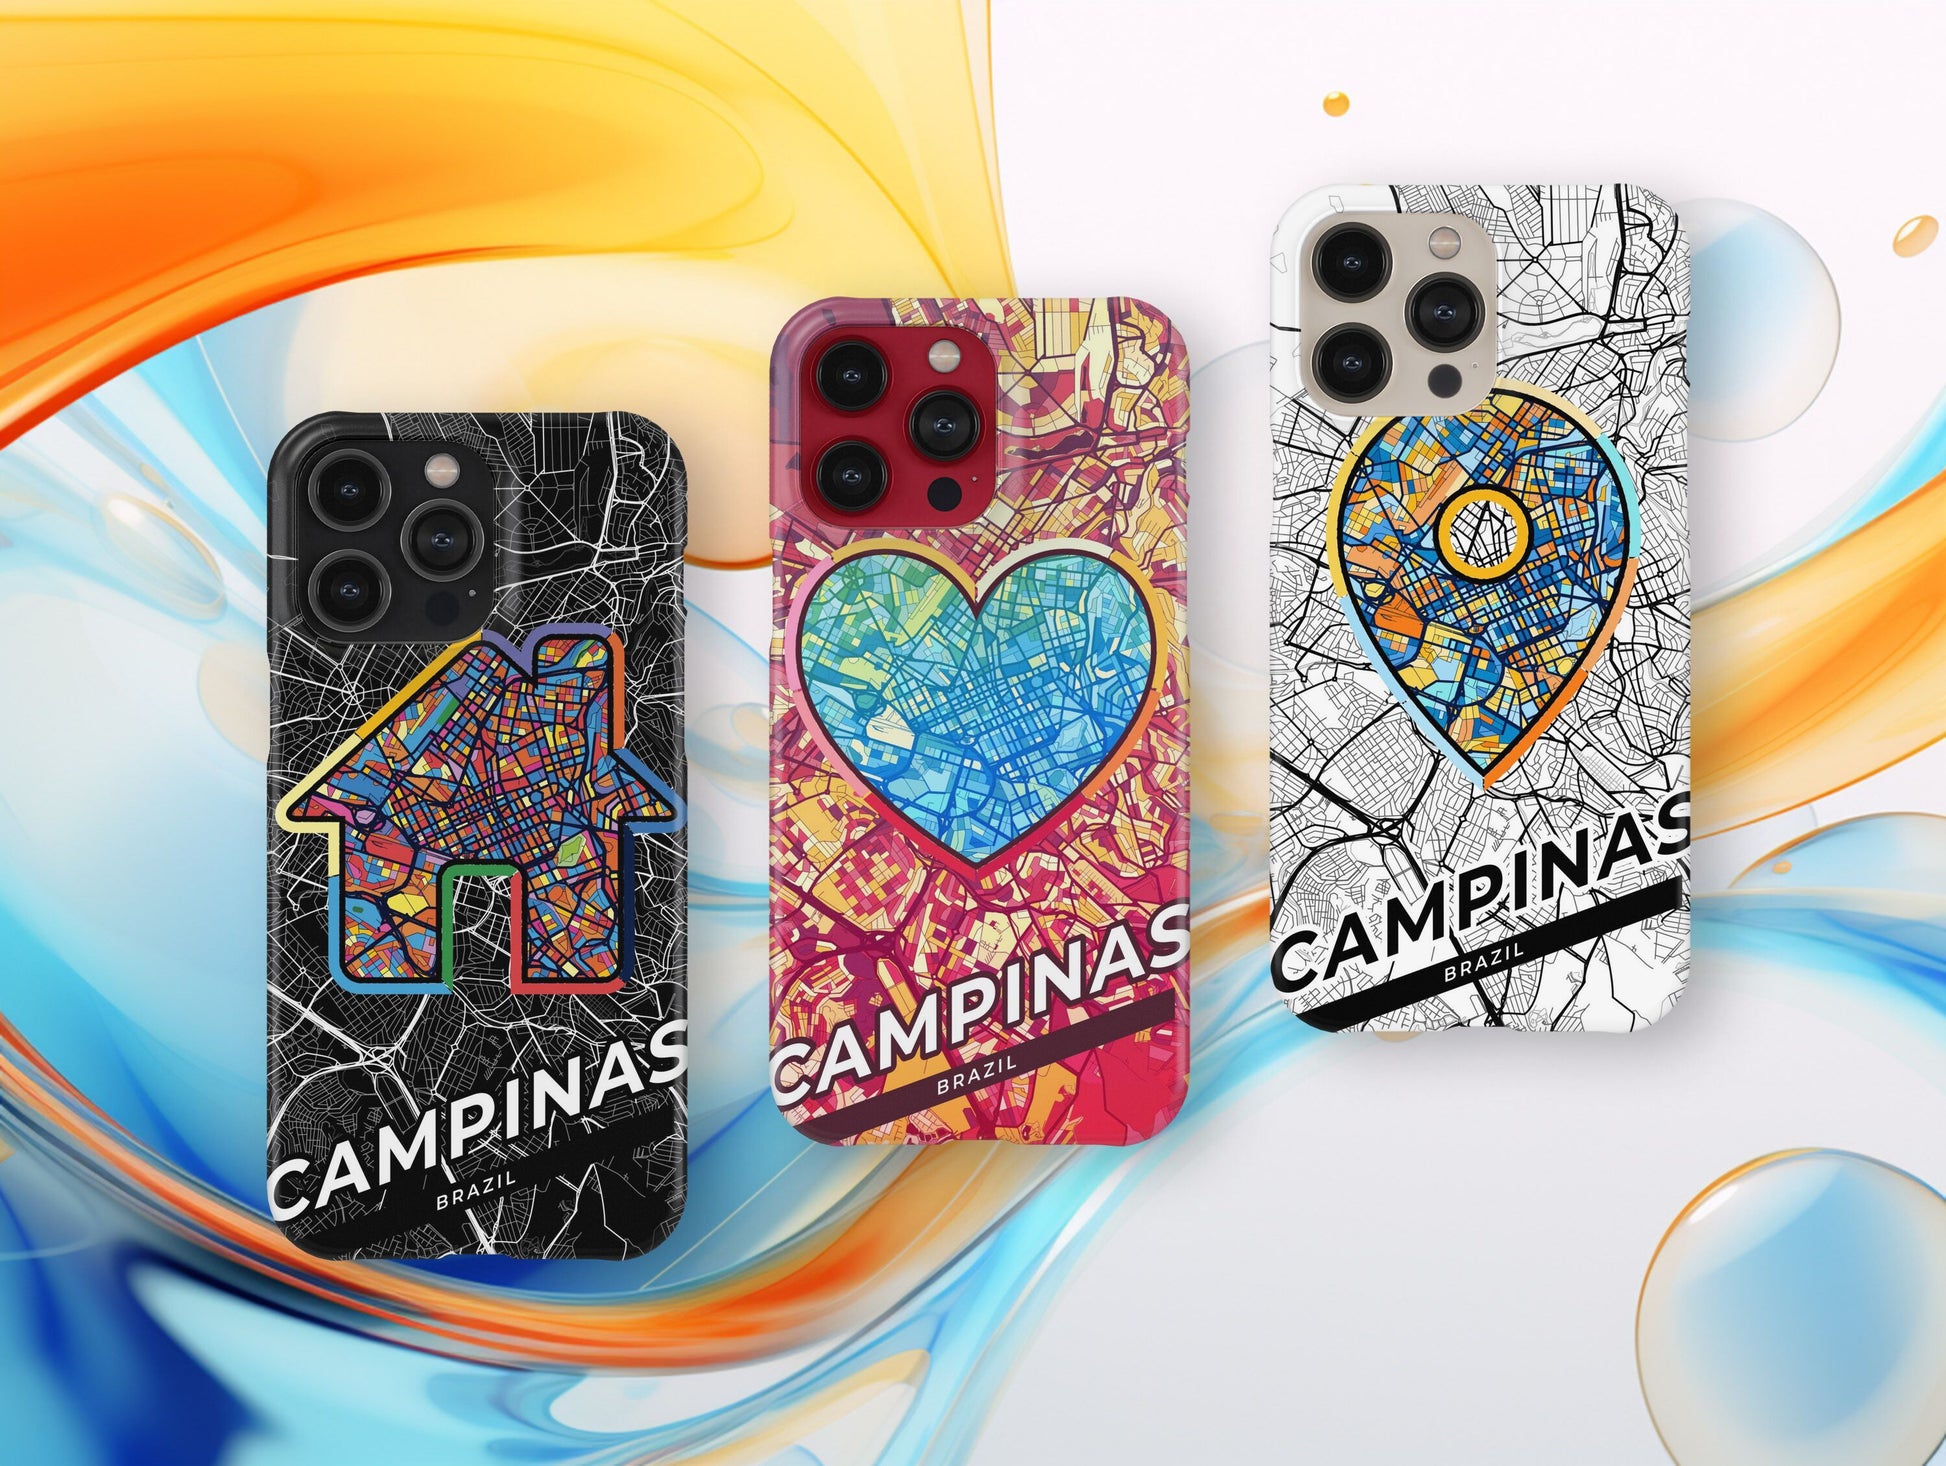 Campinas Brazil slim phone case with colorful icon. Birthday, wedding or housewarming gift. Couple match cases.